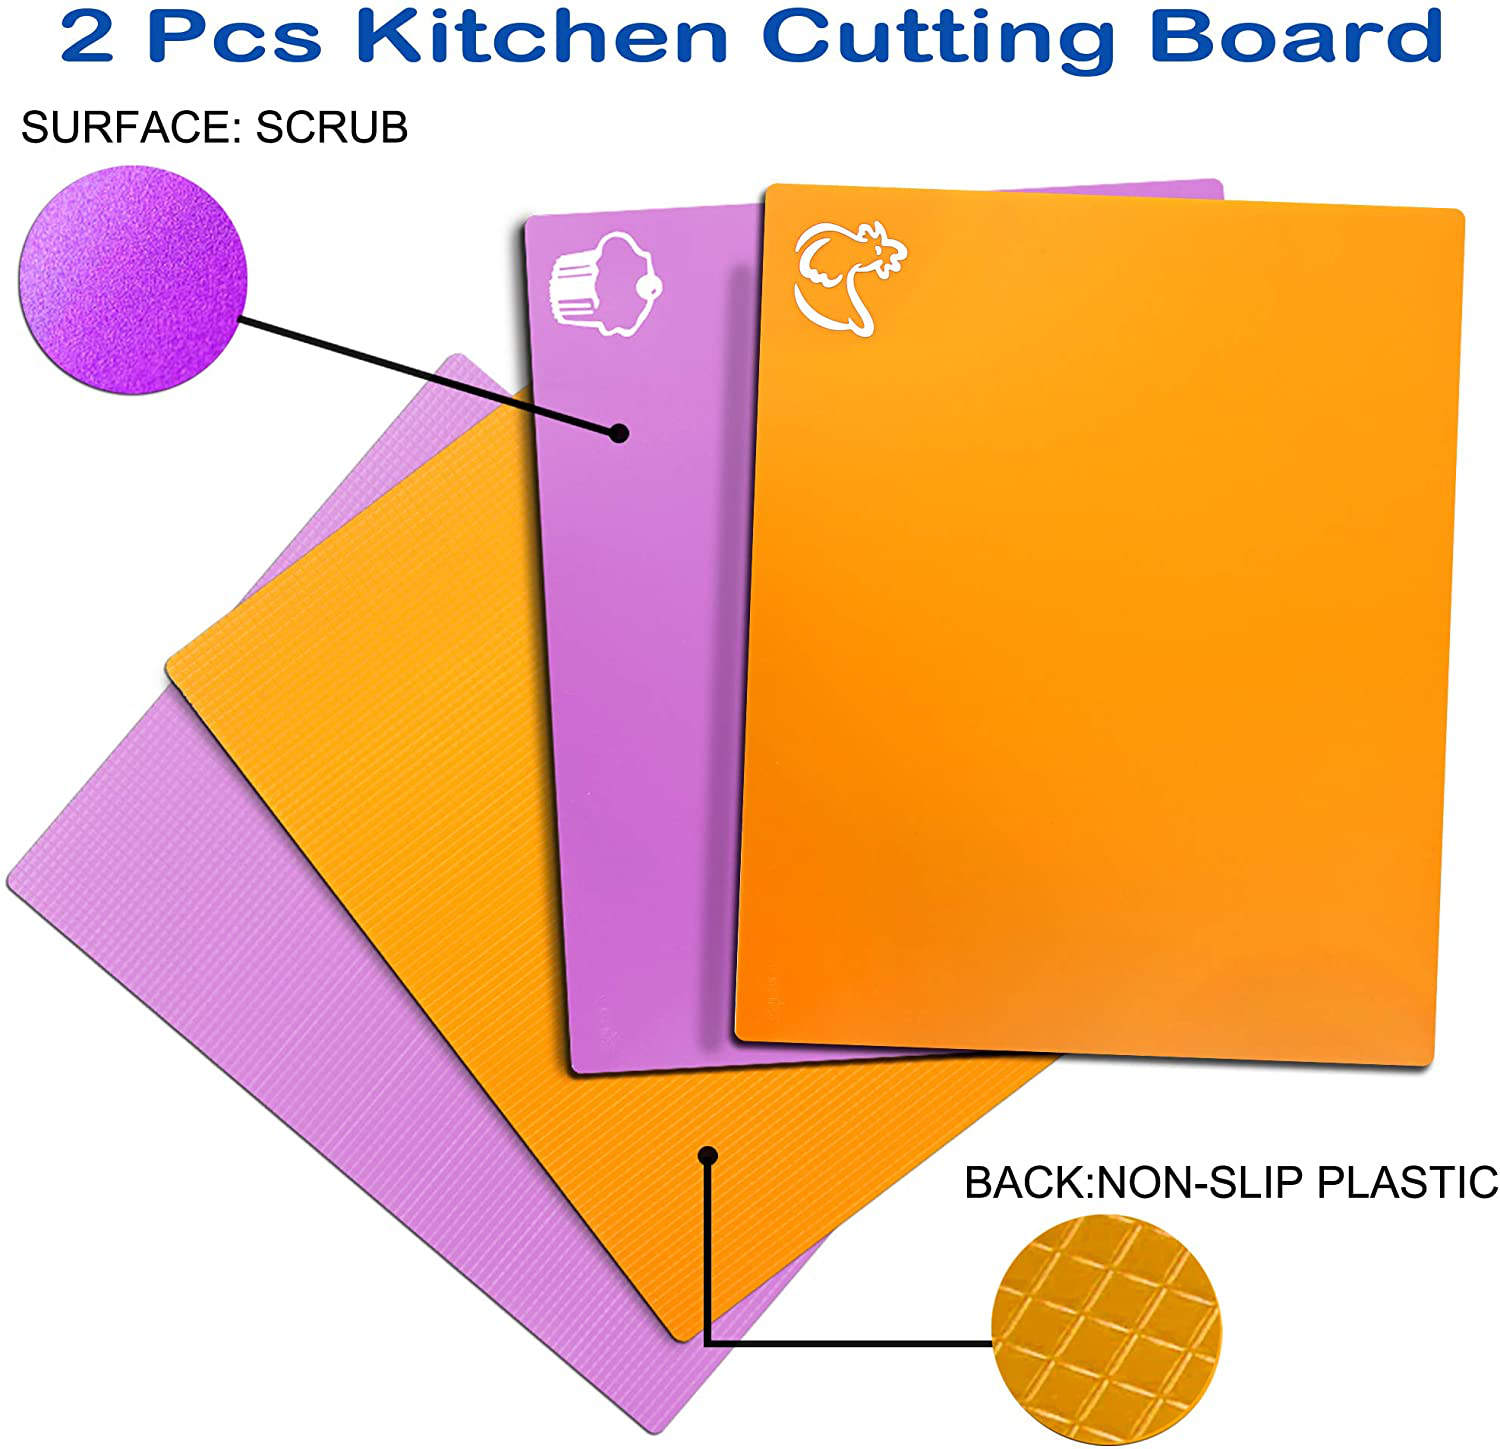 Flexible Plastic Kitchen Cutting Board Mats Set, Dishwasher Safe, Food Icons , Textured Grip Bottom Prevents Slipping, Non-Porous Colorful, Translucent Colors (Set of 4) by Orrdice